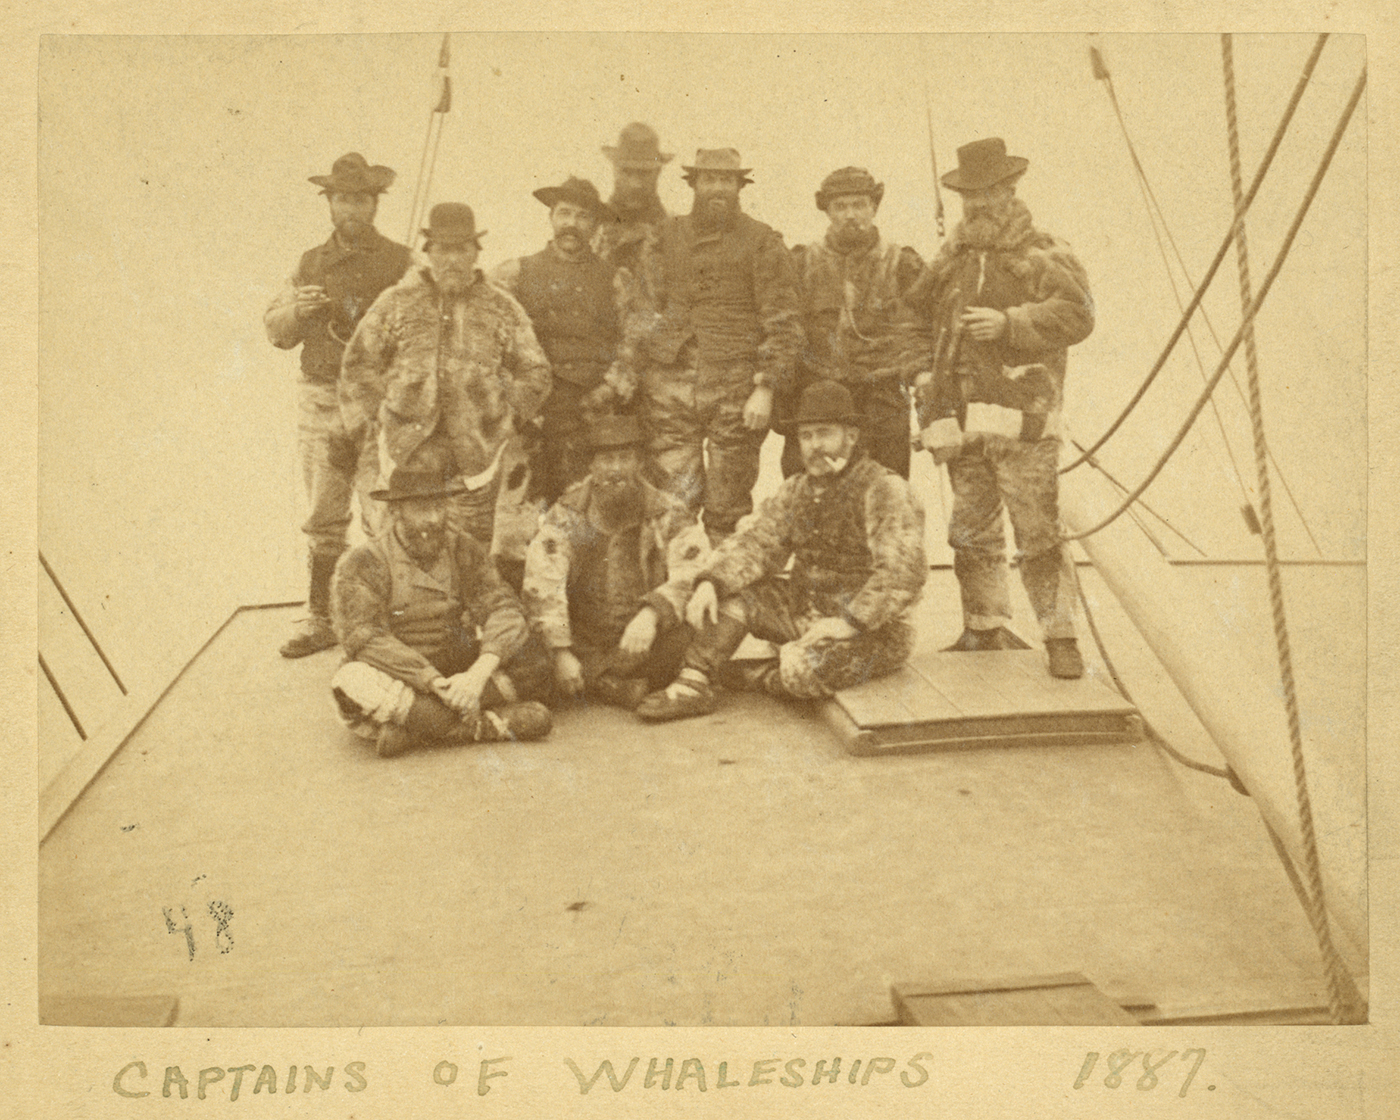 Sepia photo of whaling Captains of Whaleships in Arctic dress